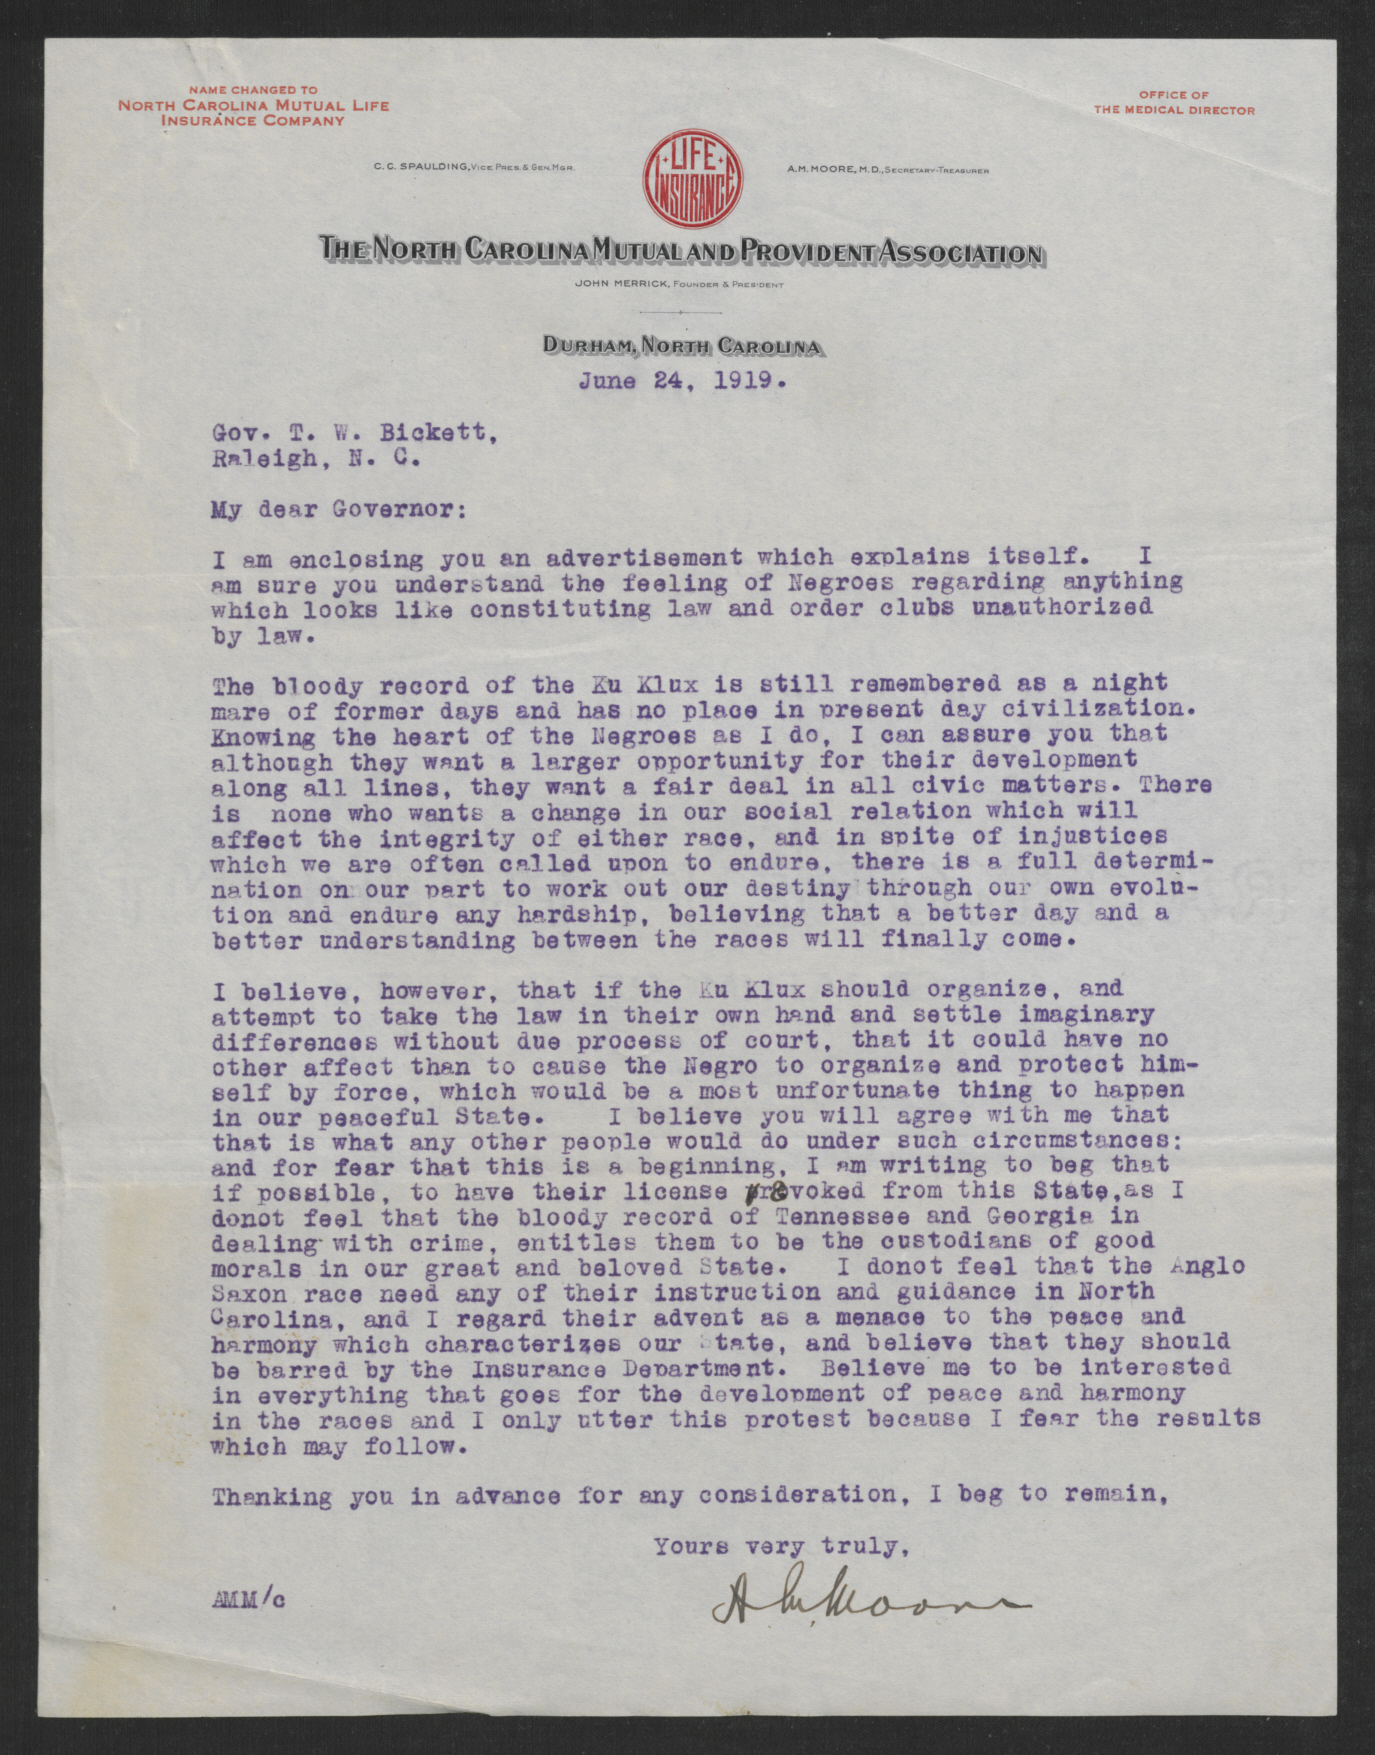 Letter from Moore to Bickett, June 24, 1919